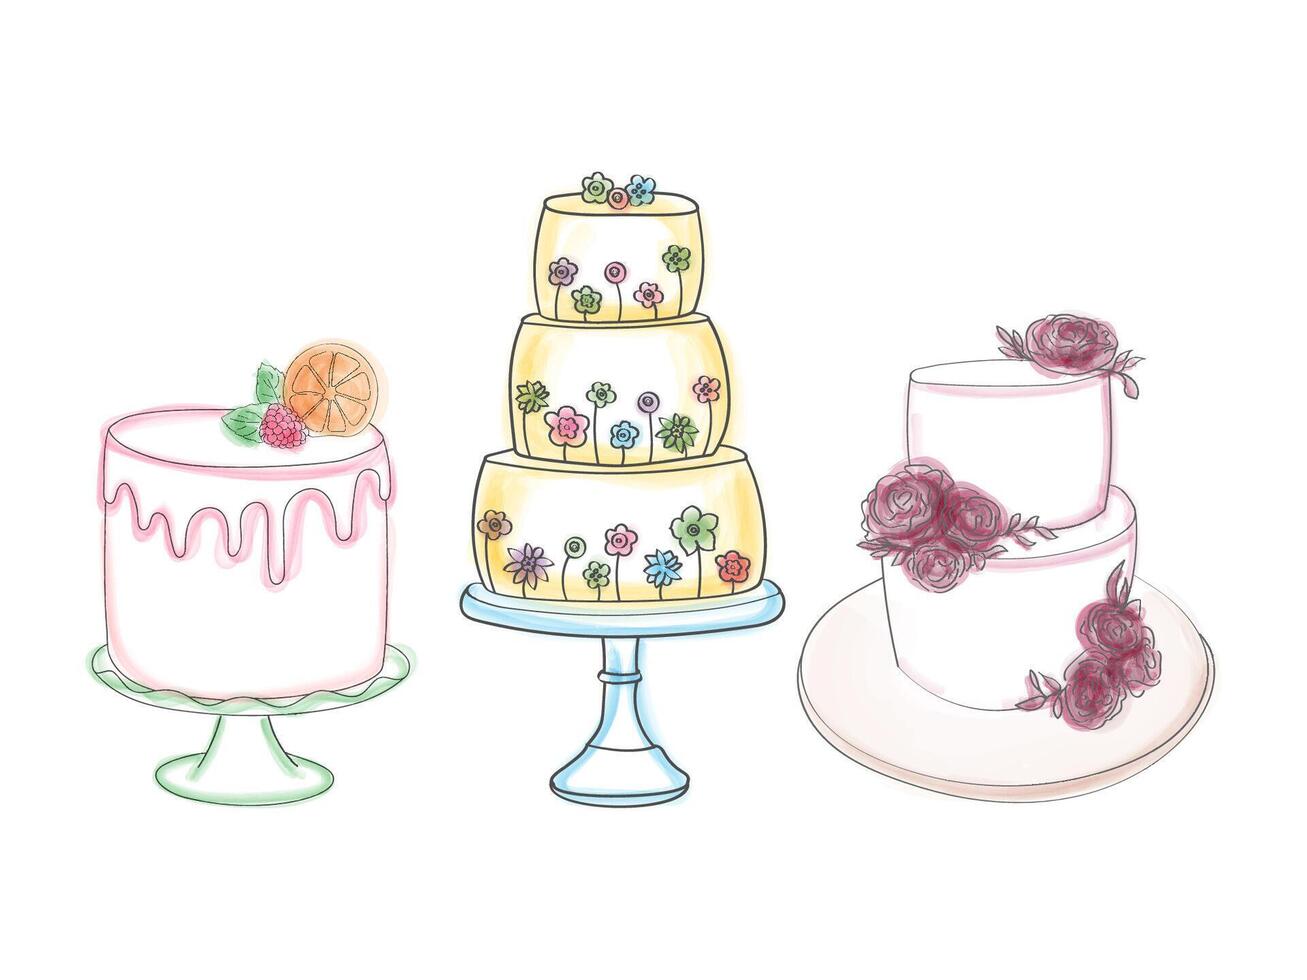 The drawing depicts three distinct types of cakes, showcasing the variety in design, shape, and decorations. Each cake is uniquely presented, highlighting their differences in style and flavor vector